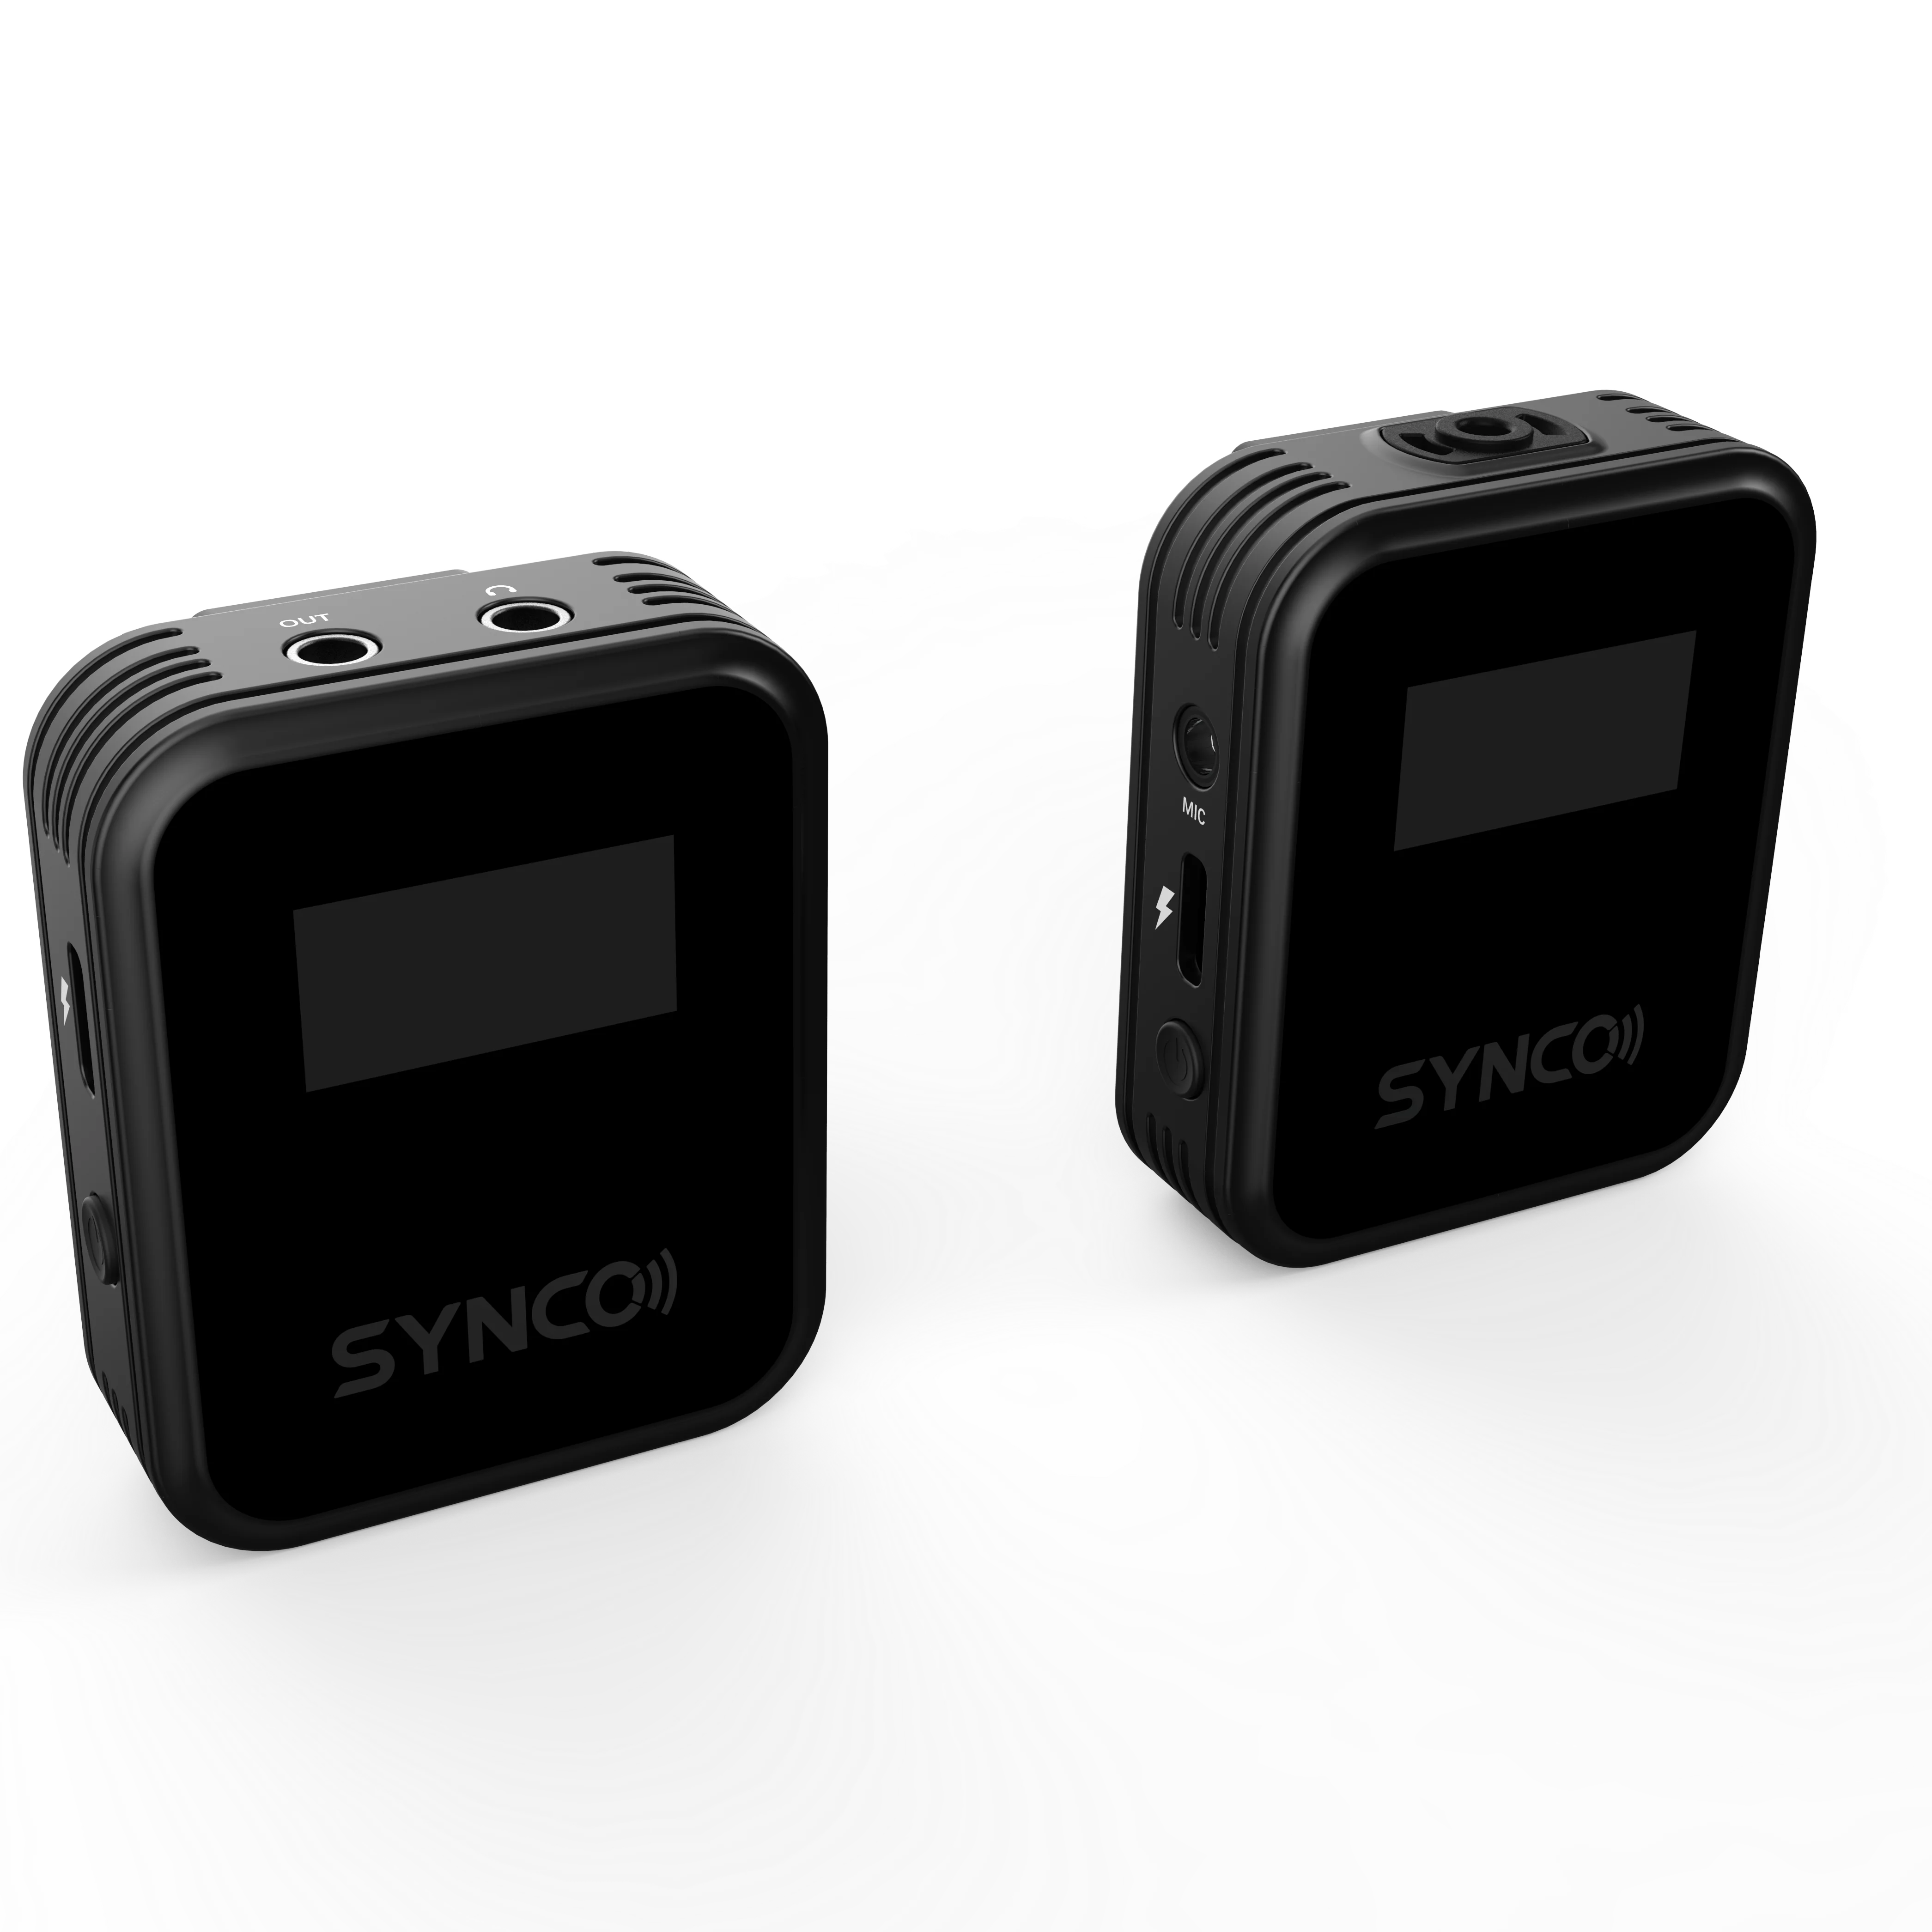 

SYNCO G2(A1) 2.4GHz Wireless Microphone Lavalier Microphone System 1-Trigger-1 Transmitter with Receiver Quick Charge fold fit